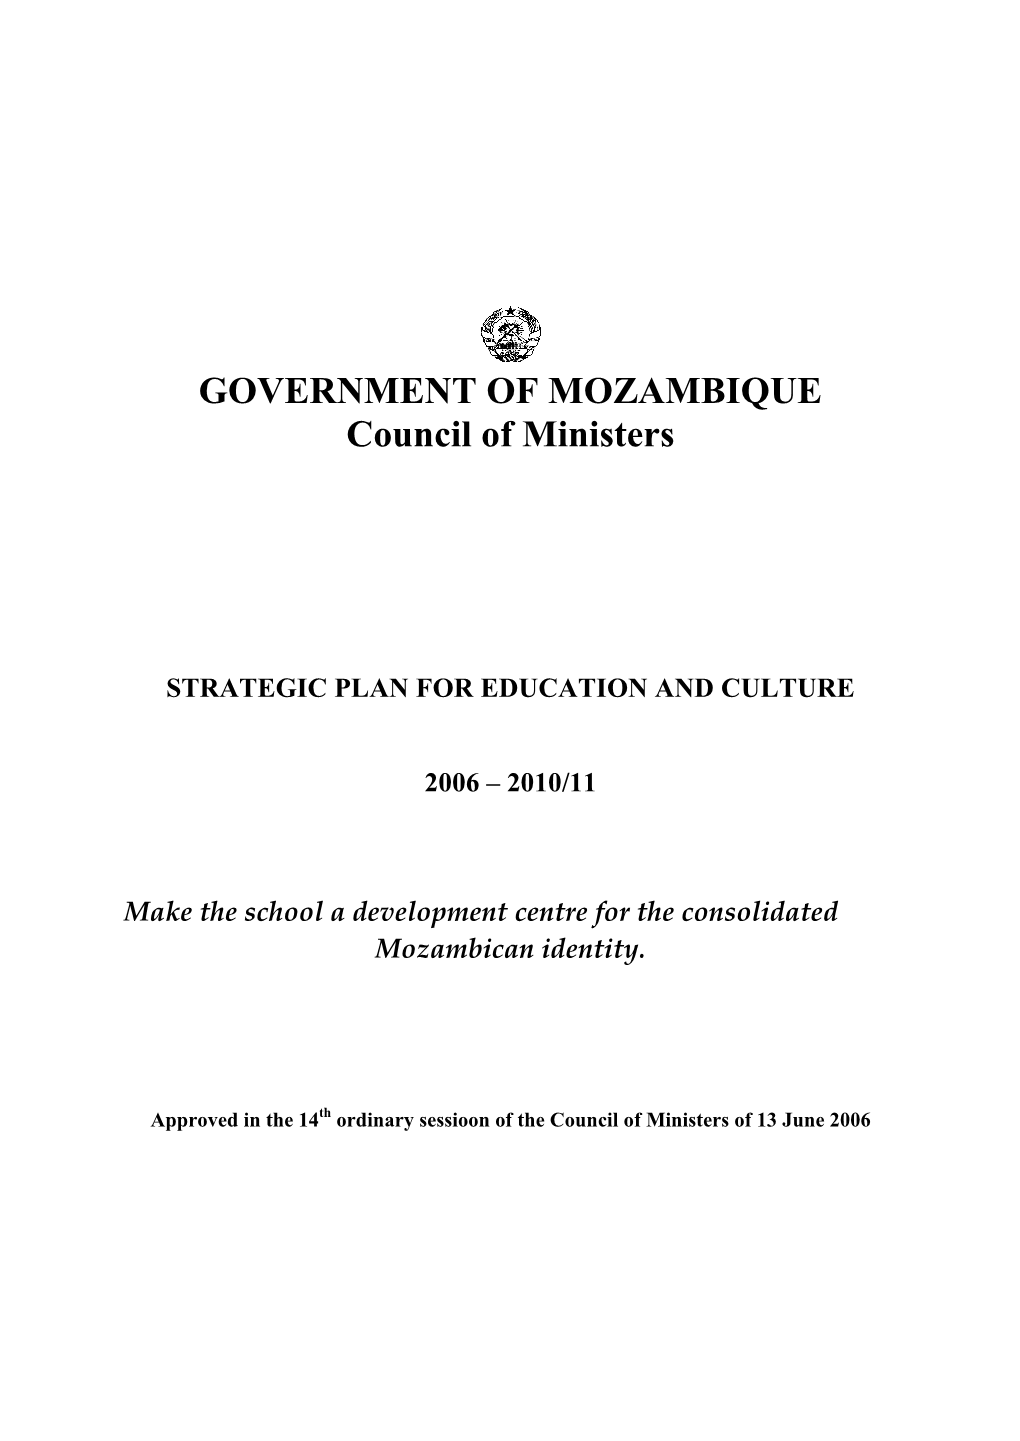 GOVERNMENT of MOZAMBIQUE Council of Ministers